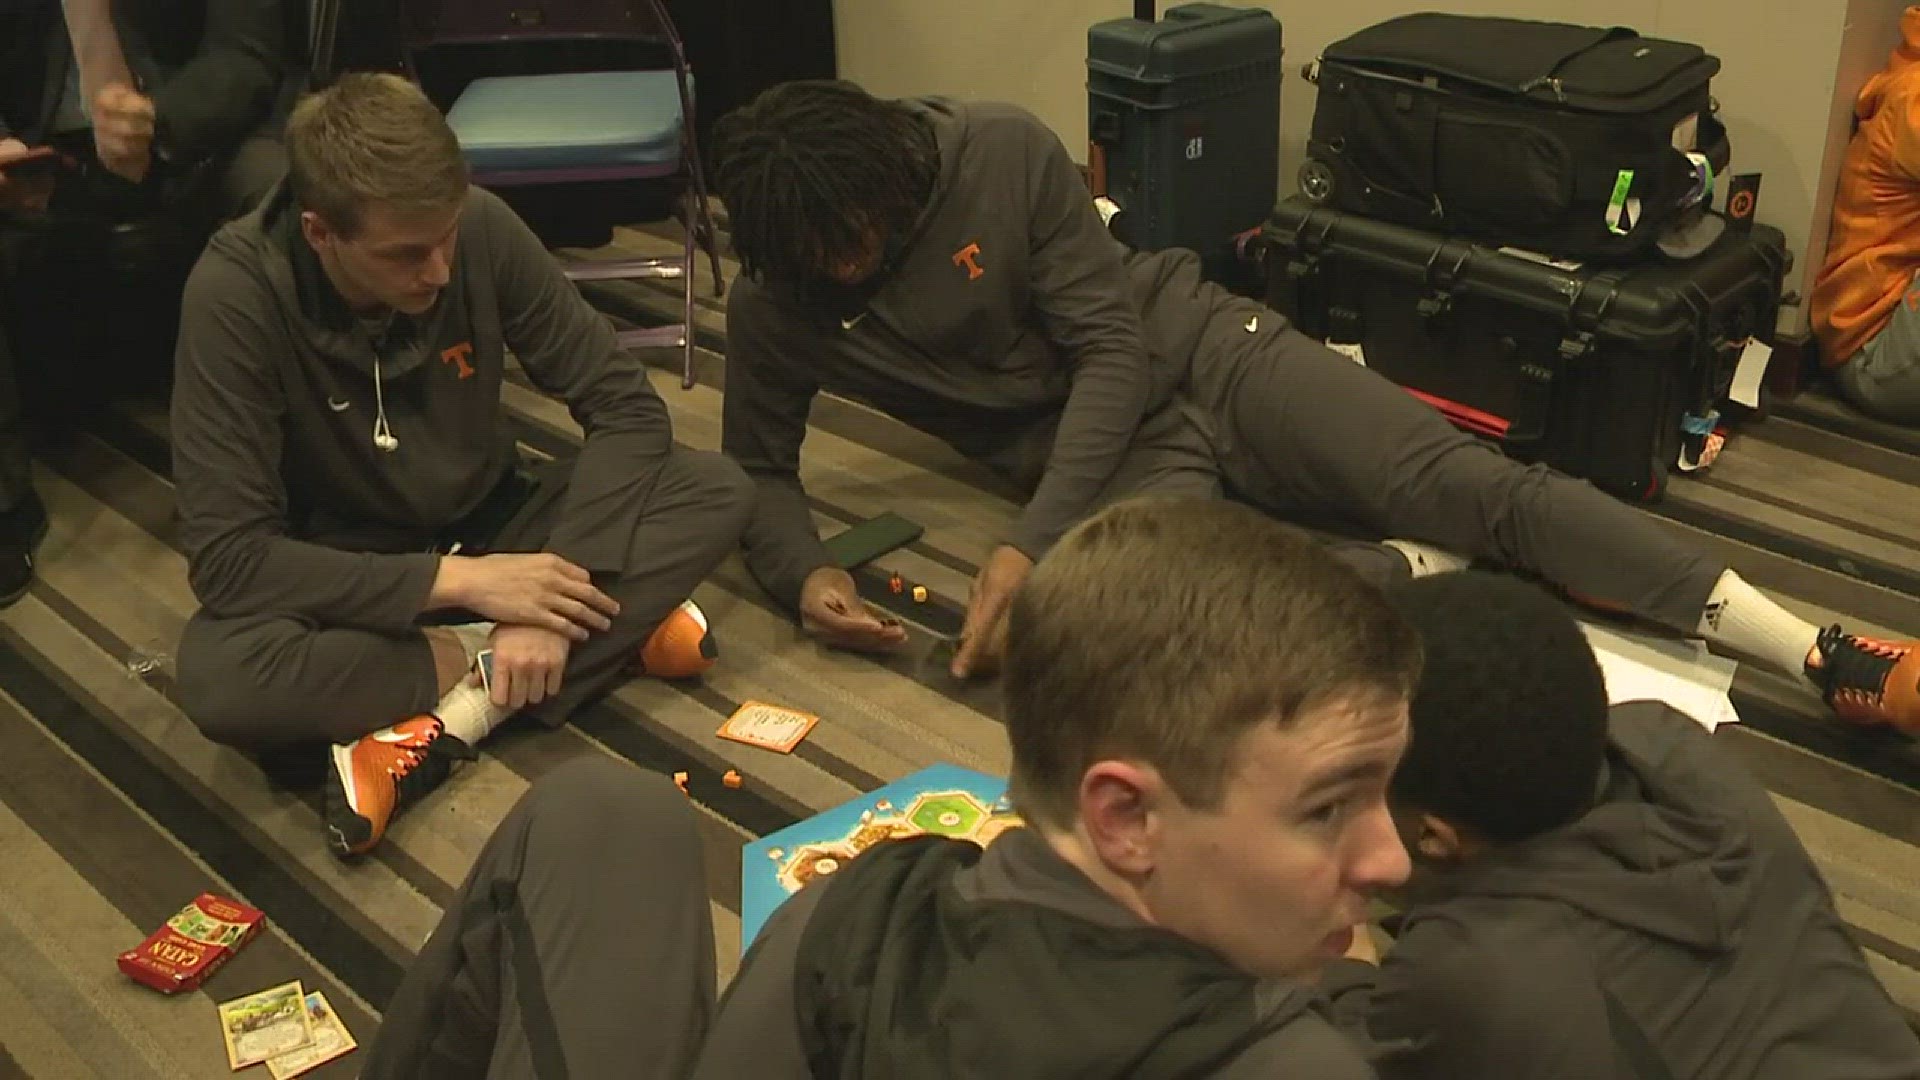 The Vols played a game of 'Settlers of Catan' while they were waiting to hear their NCAA Tournament landing spot.